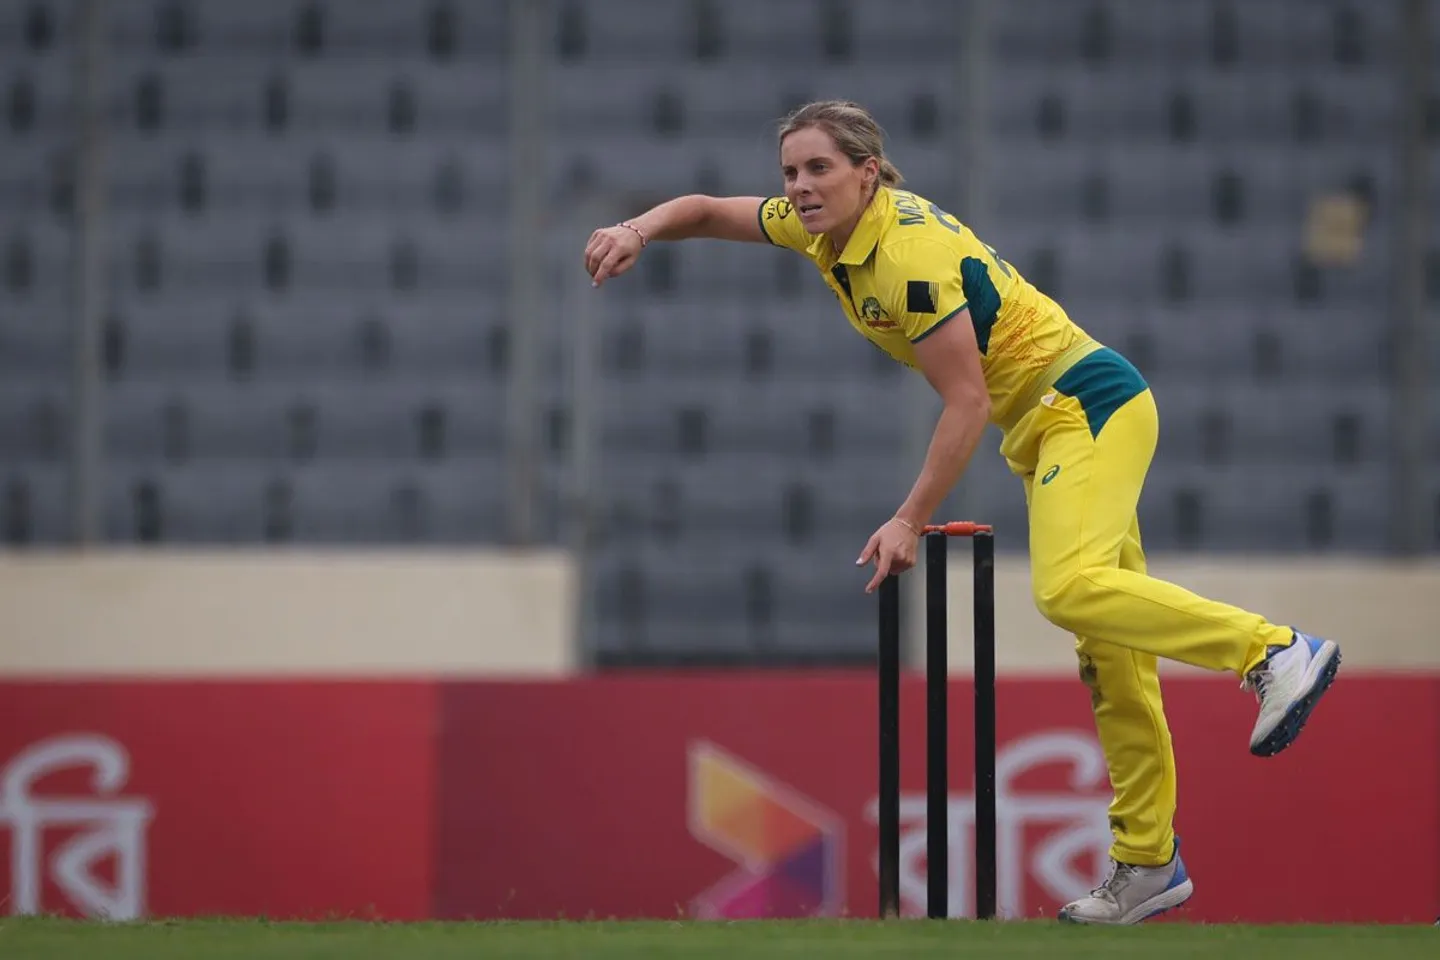 Sophie Molineux didn’t expect to win ODI series easily against Bangladesh women